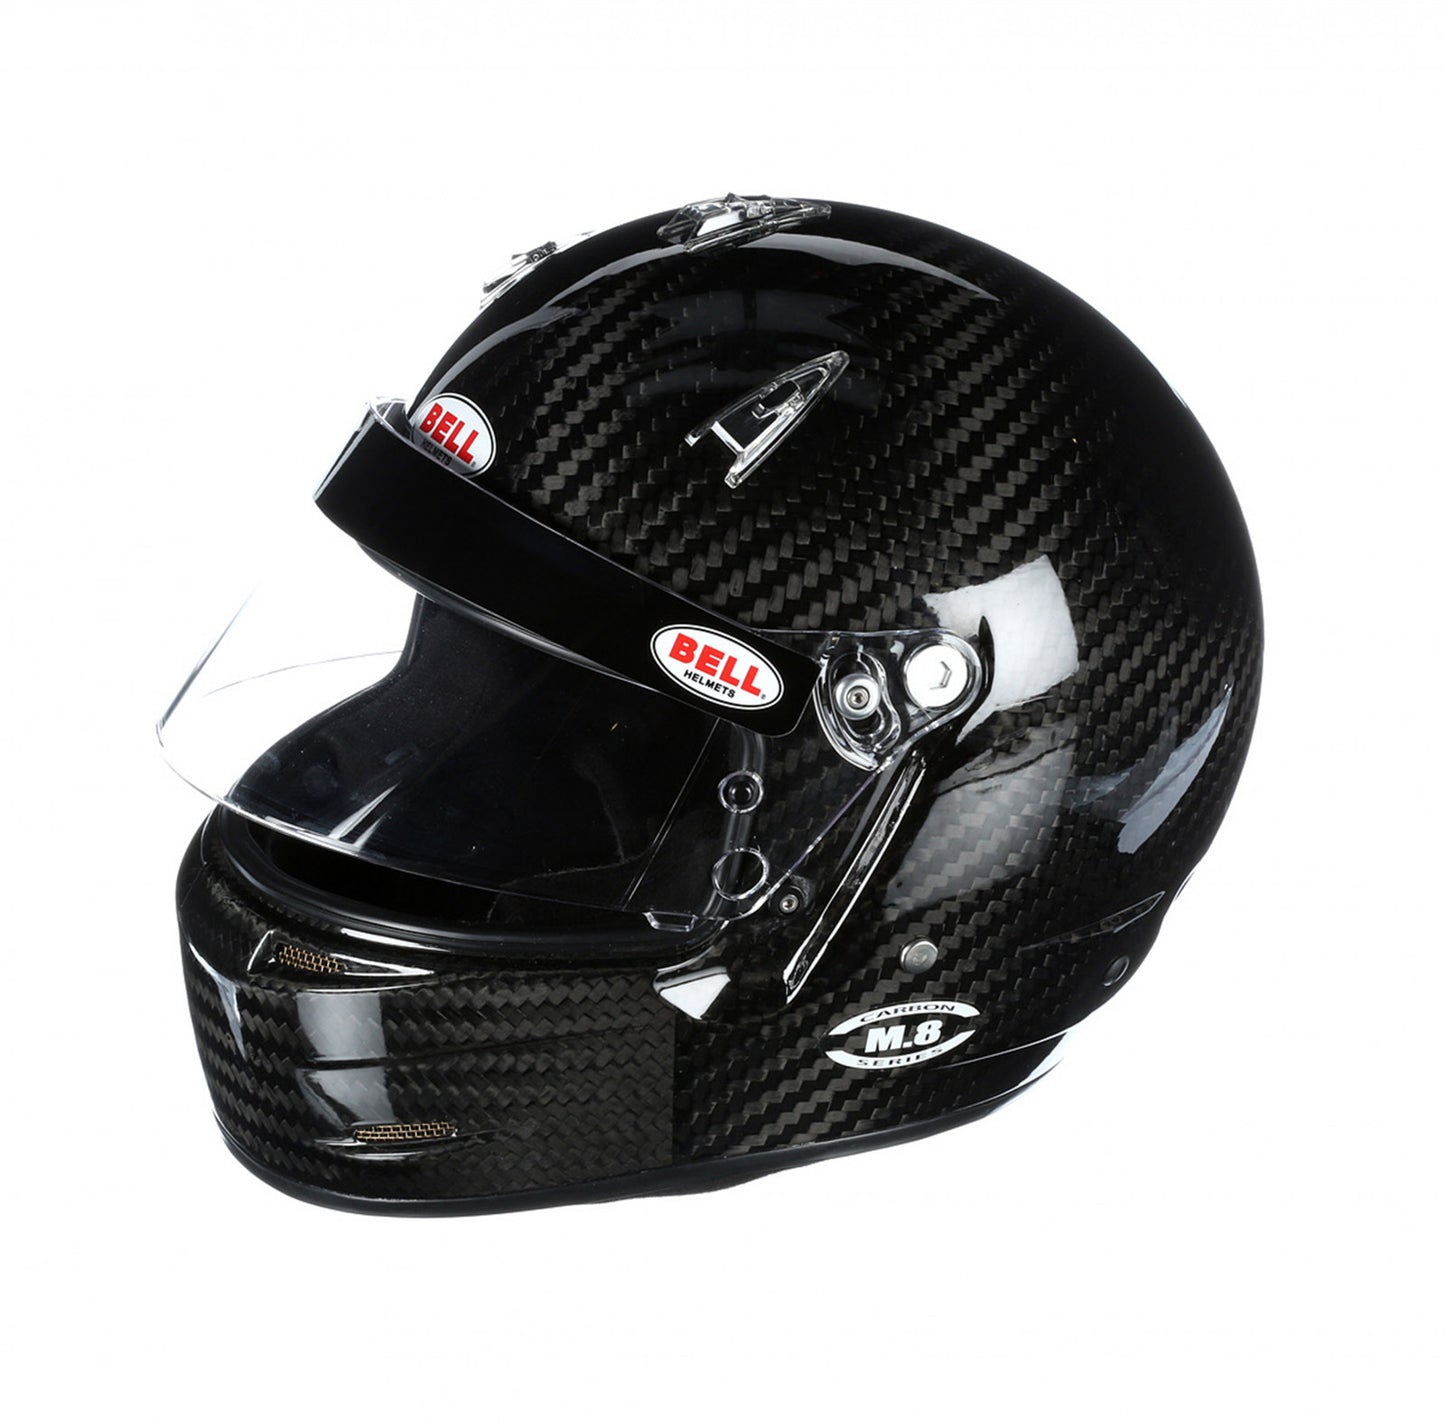 Bell M8 Carbon Racing Helmet Size Small '1208002